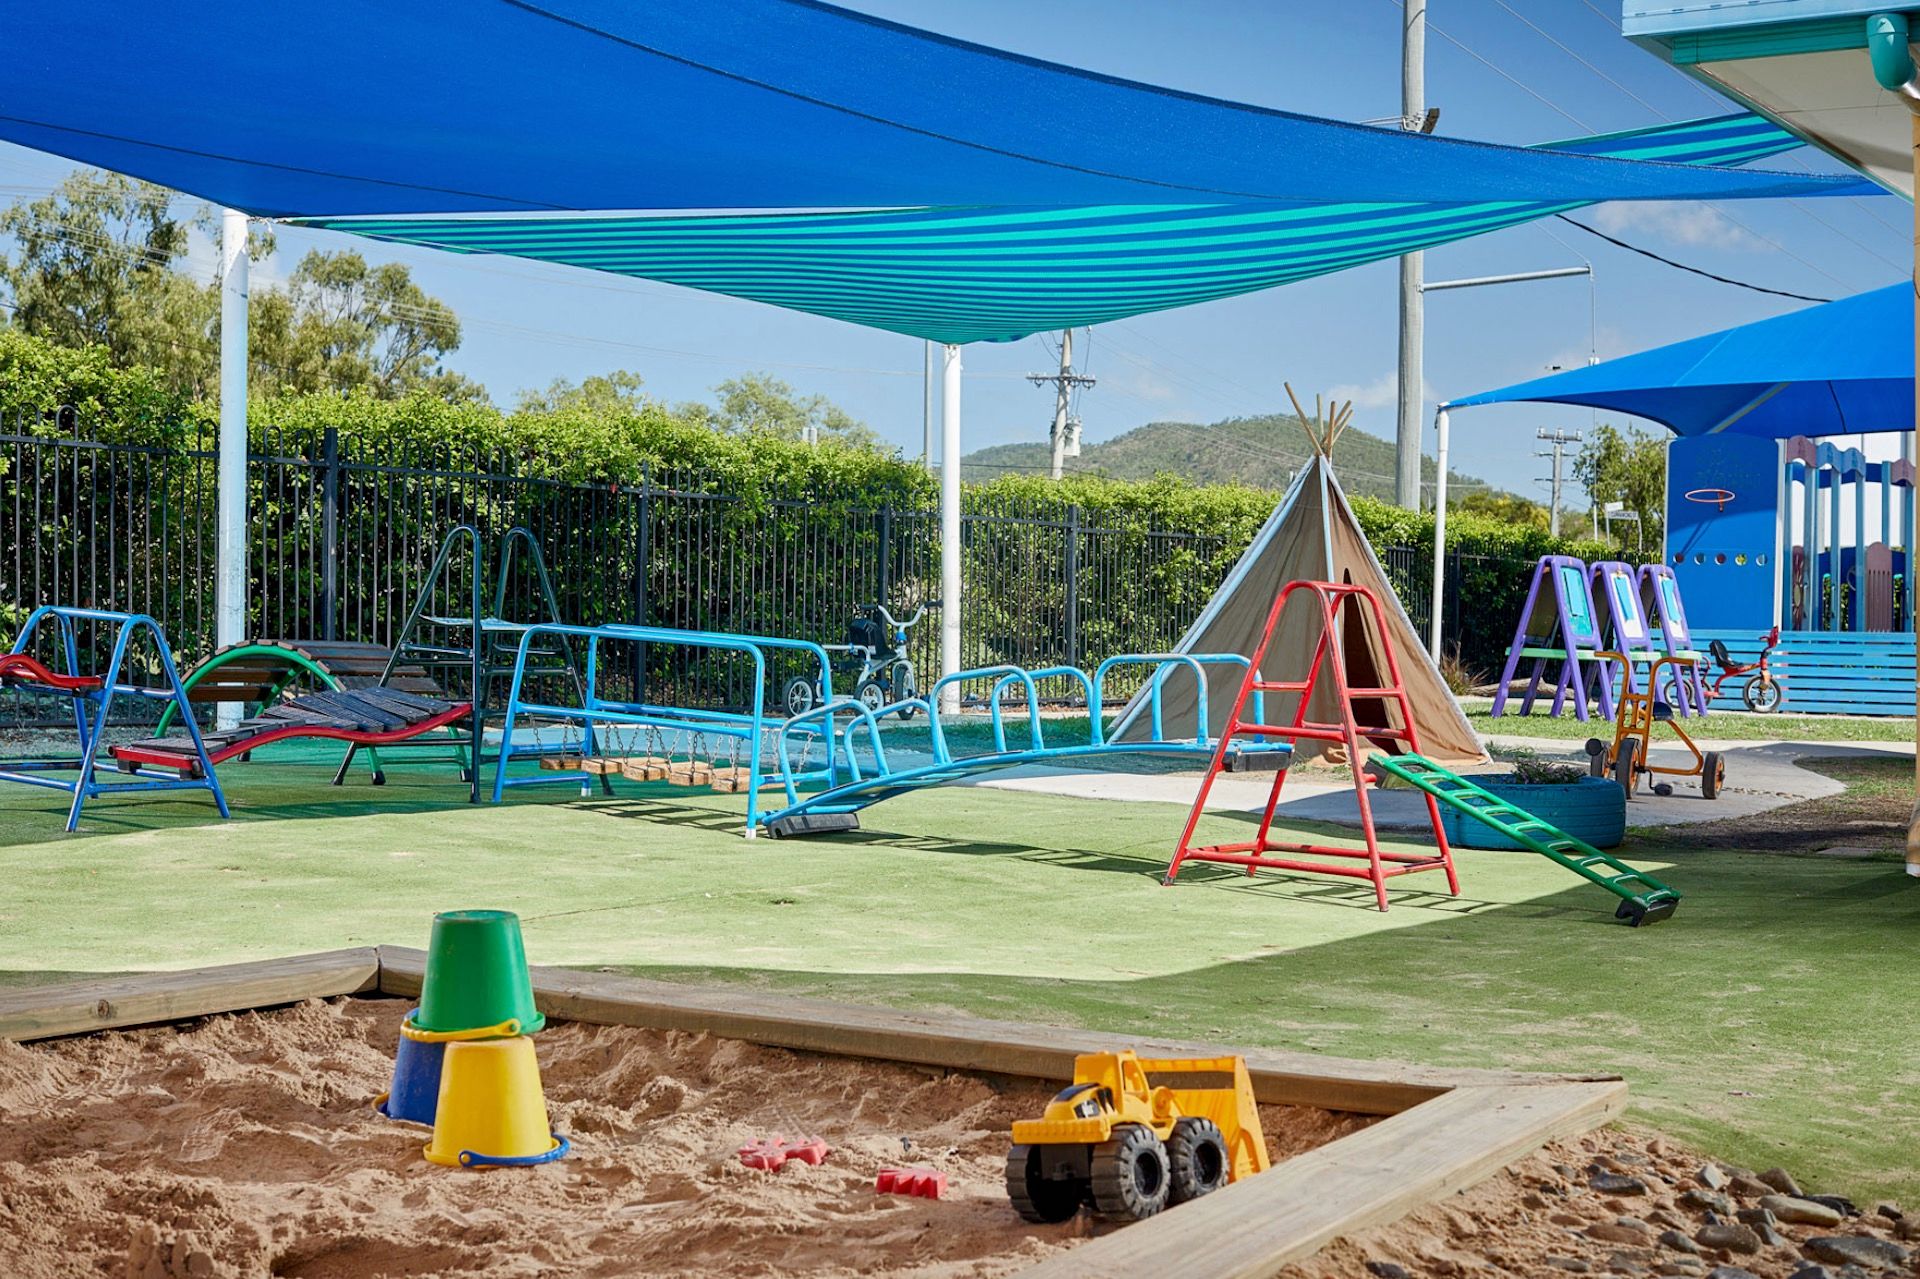 A large open playground with sandpits and climbing frames